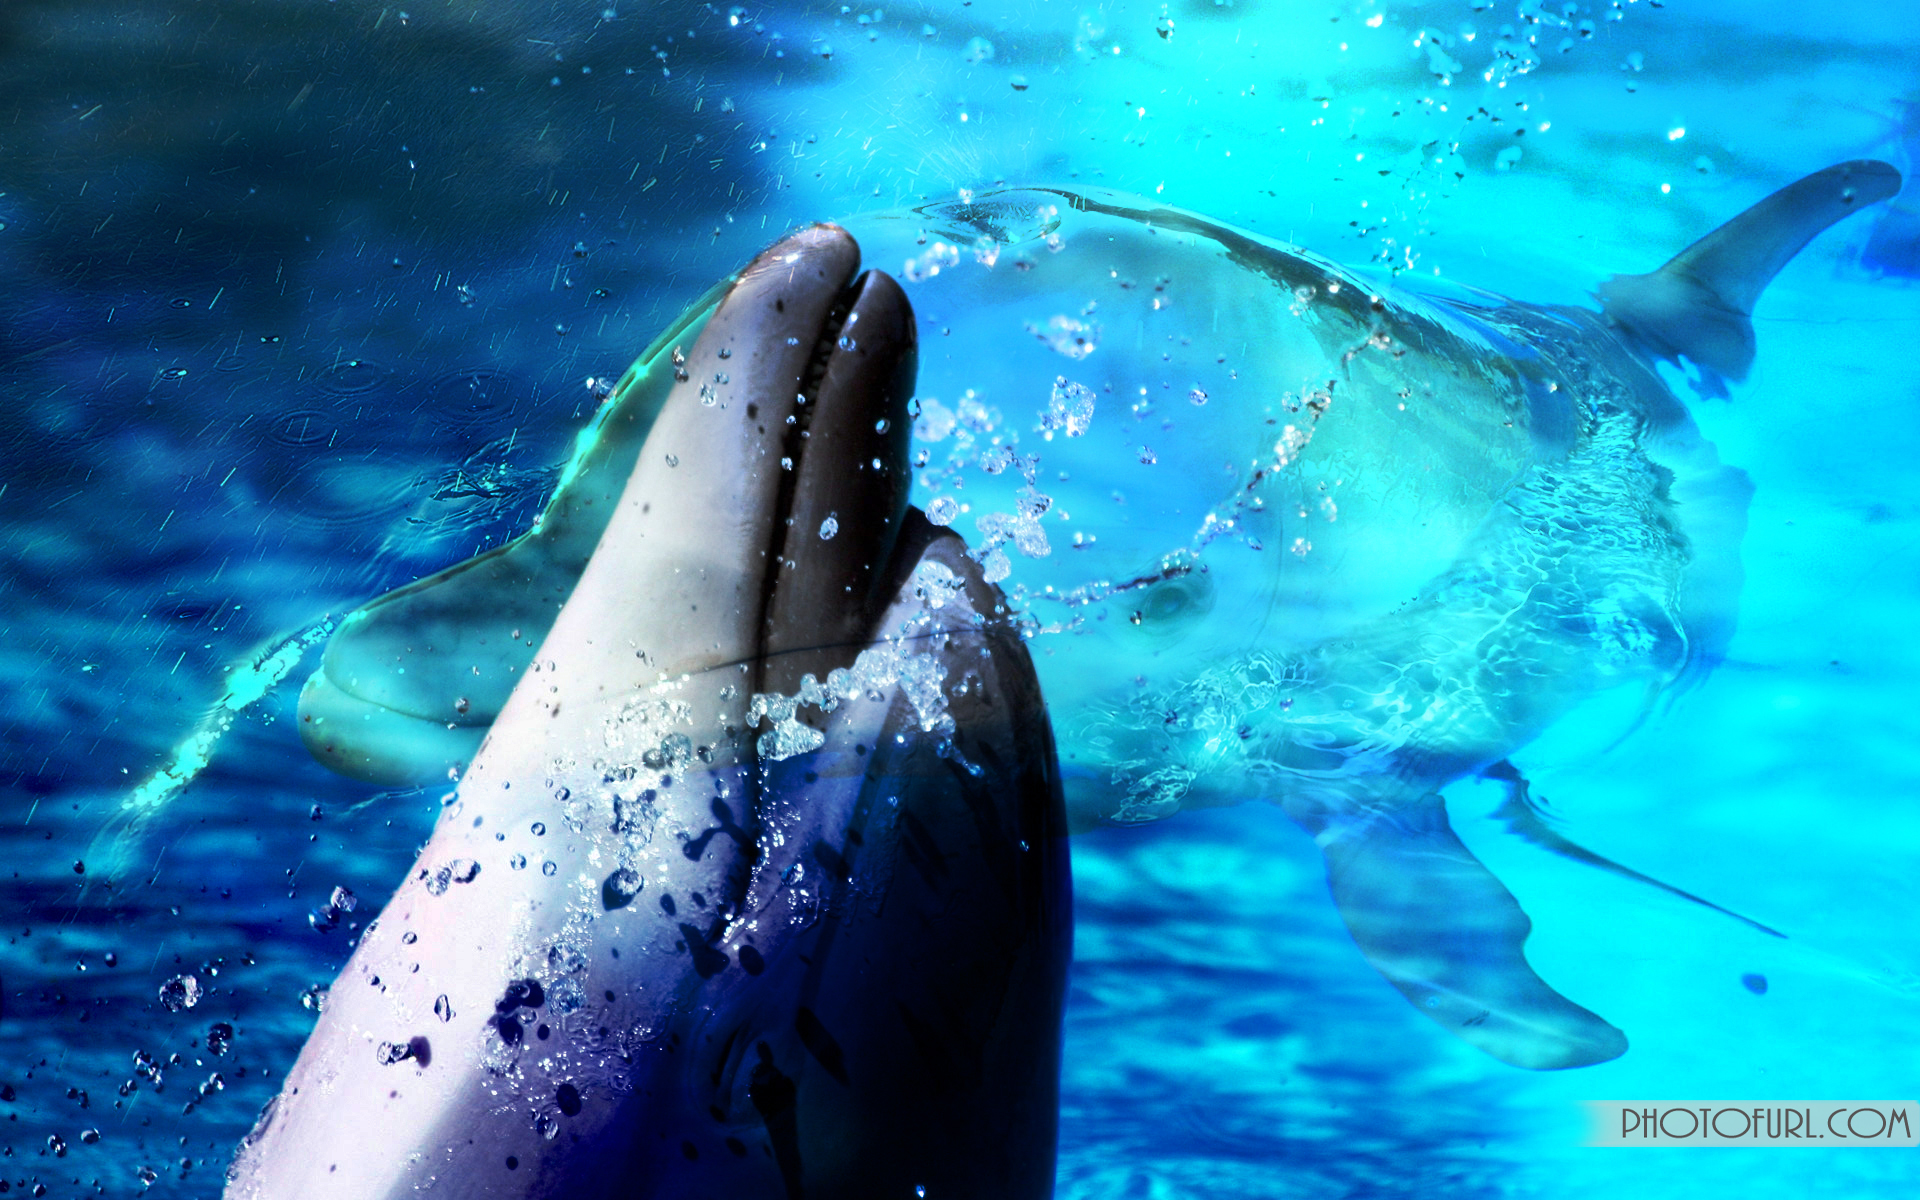 Animated Dolphin Wallpapers Hd Free - Дельфин - 1920x1200 Wallpaper -  